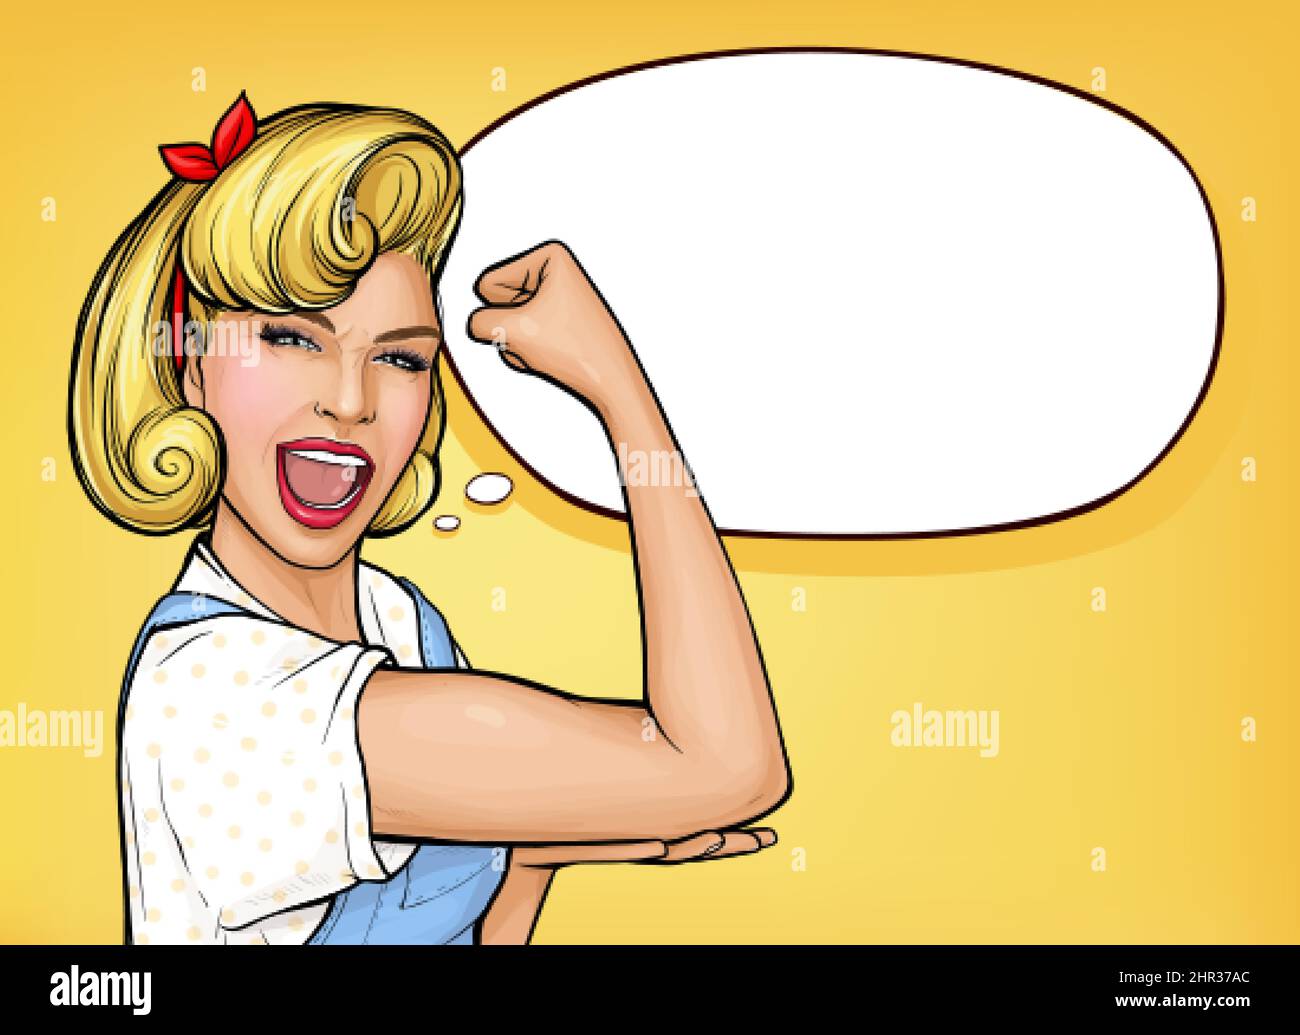 Pop art confident woman screaming and demonstrating strength by roll up her sleeve and clenched fist. Blonde girl showing symbol of female power, women rights, feminism protest. We can do it poster. Stock Vector